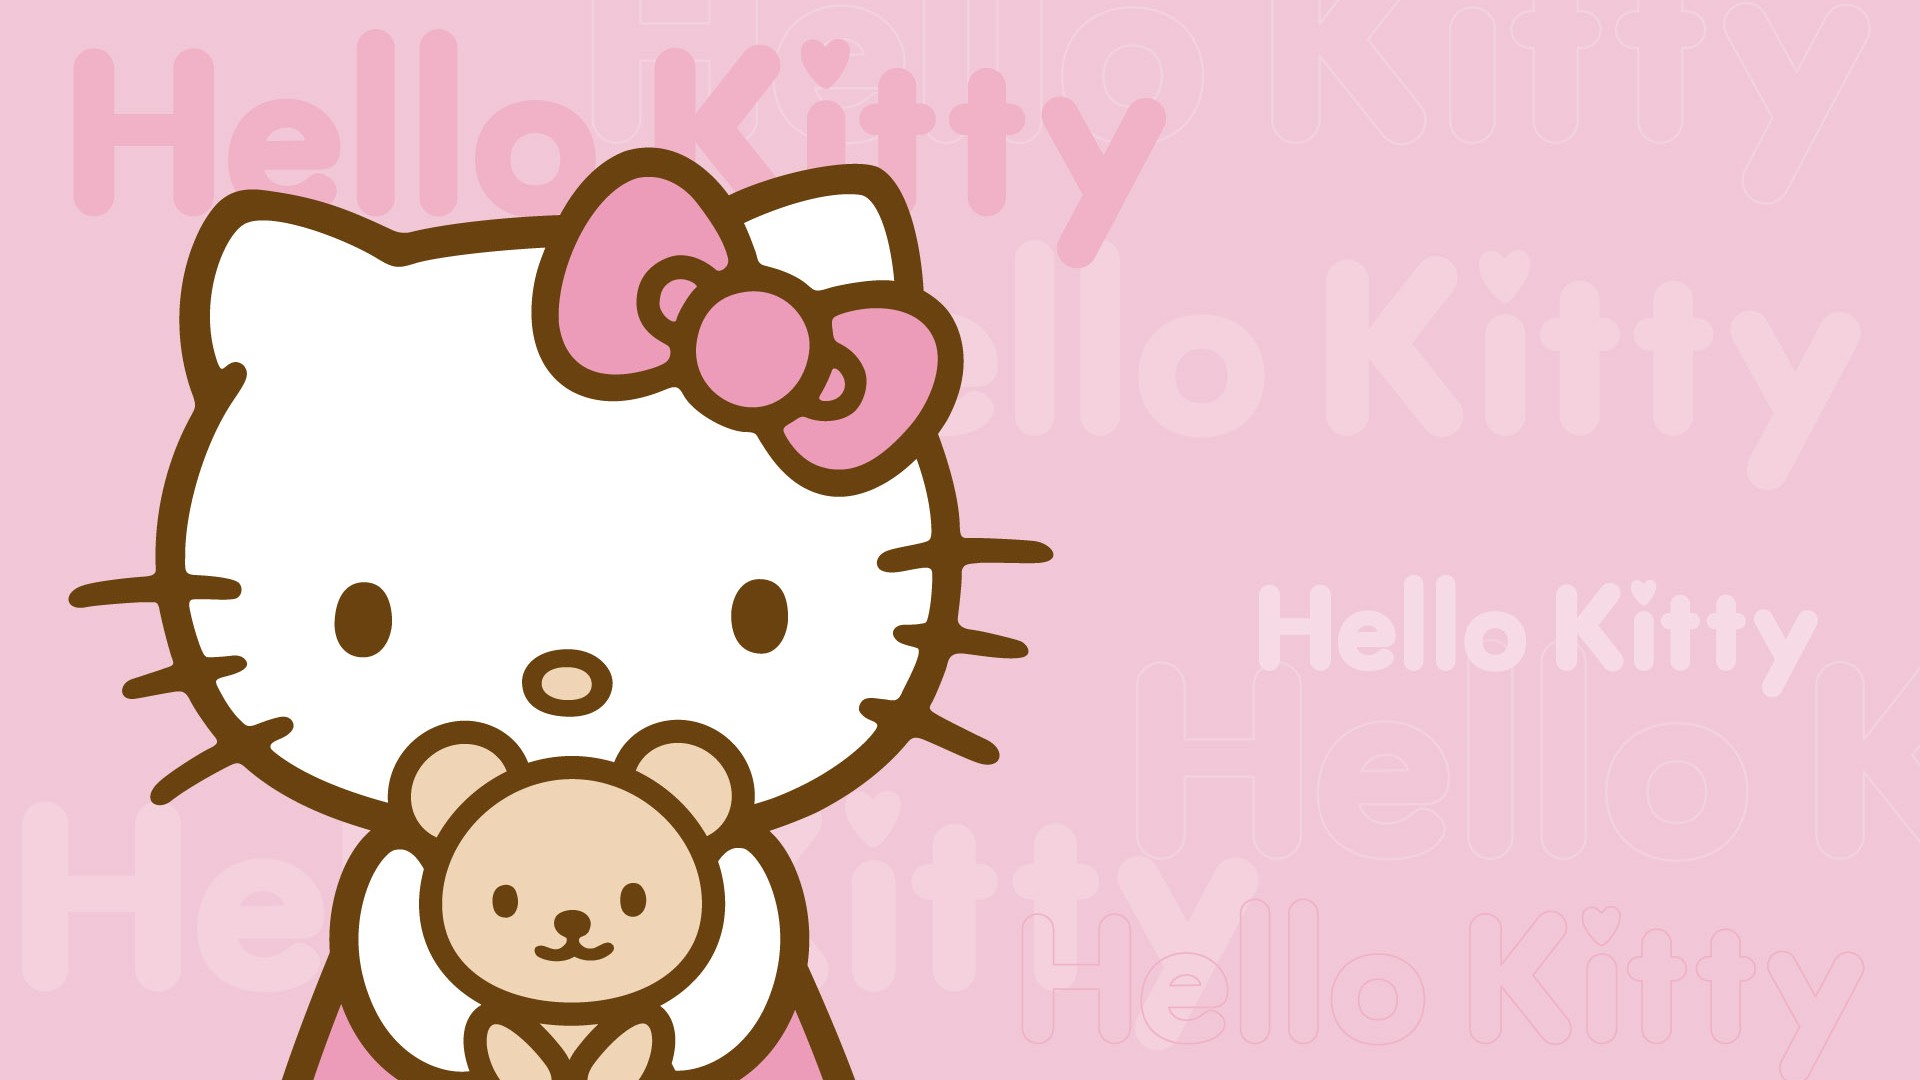 Hello Kitty Pictures Desktop Backgrounds HD with resolution 1920X1080 pixel. You can use this wallpaper as background for your desktop Computer Screensavers, Android or iPhone smartphones